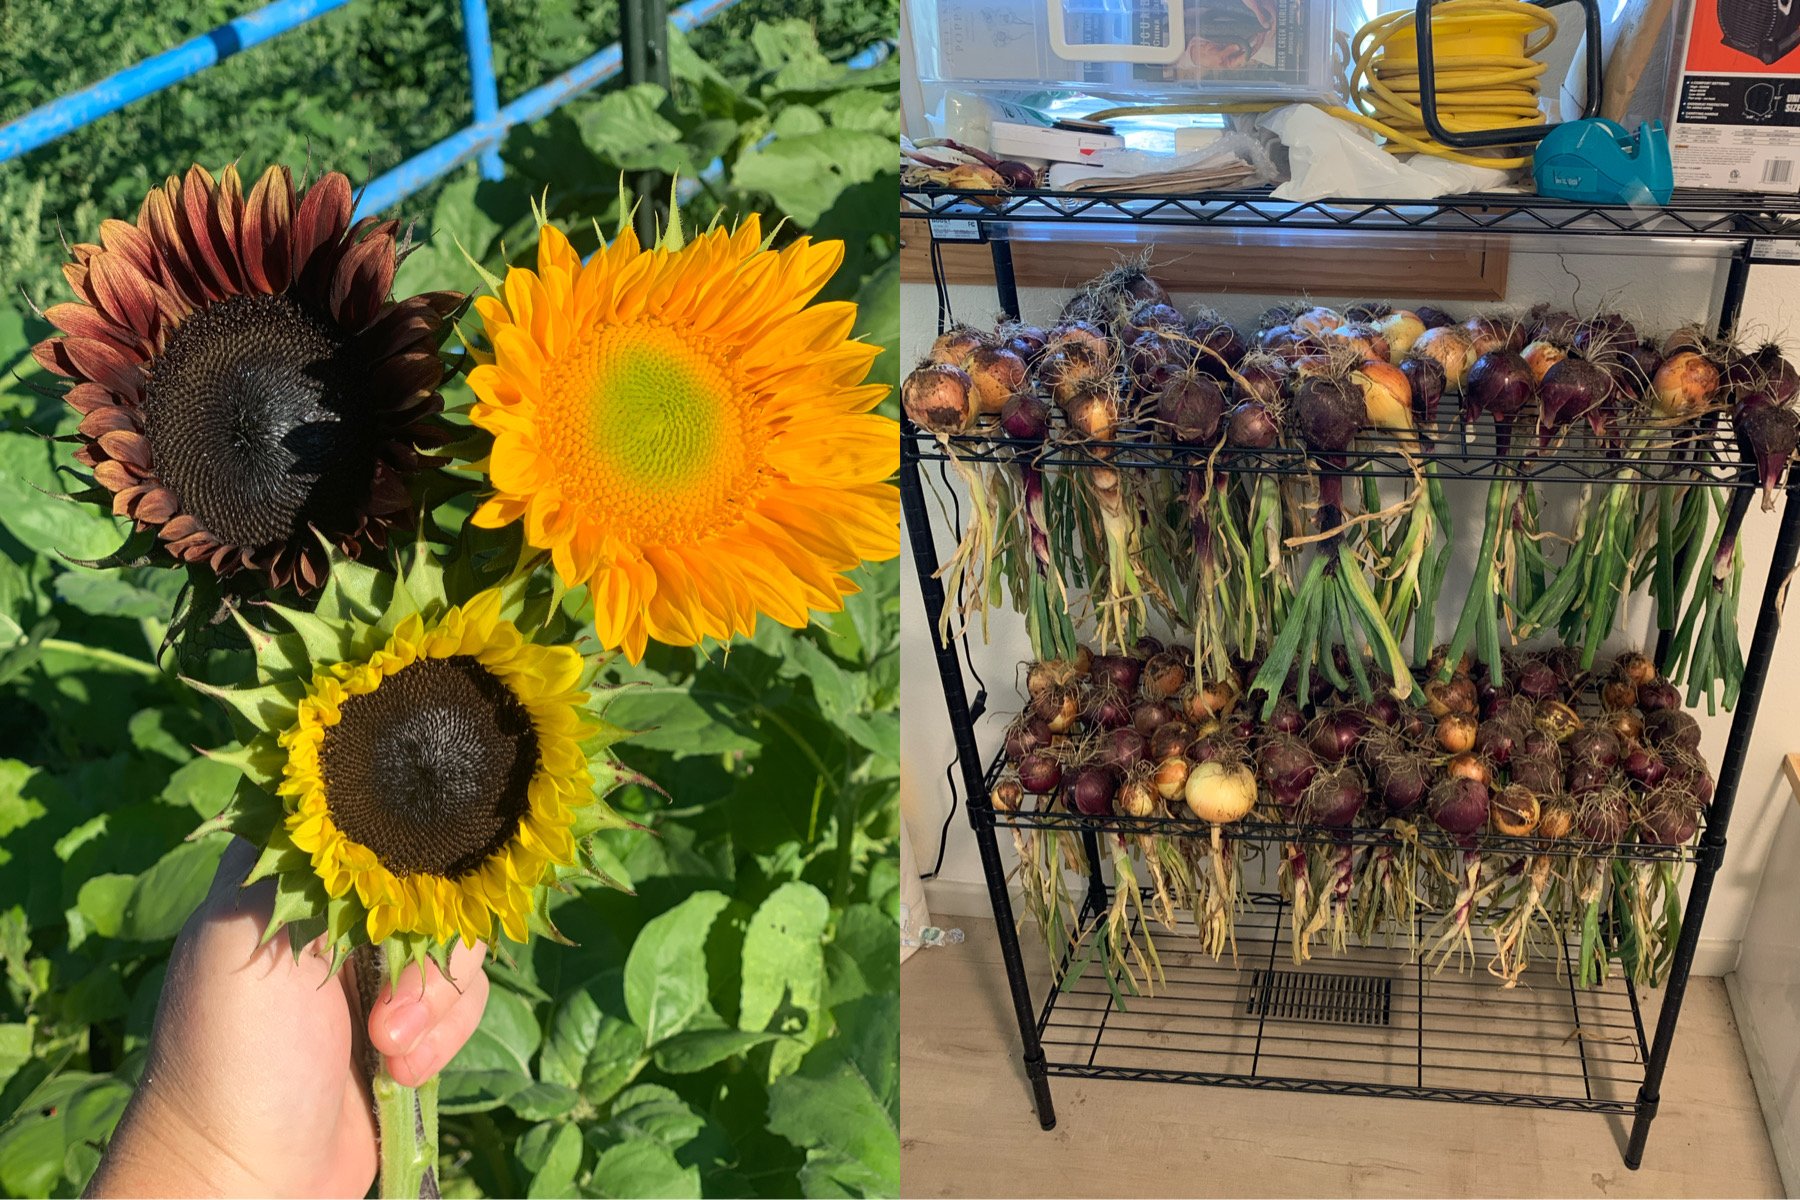  Who would’ve known it was a good onion and sunflower year? 